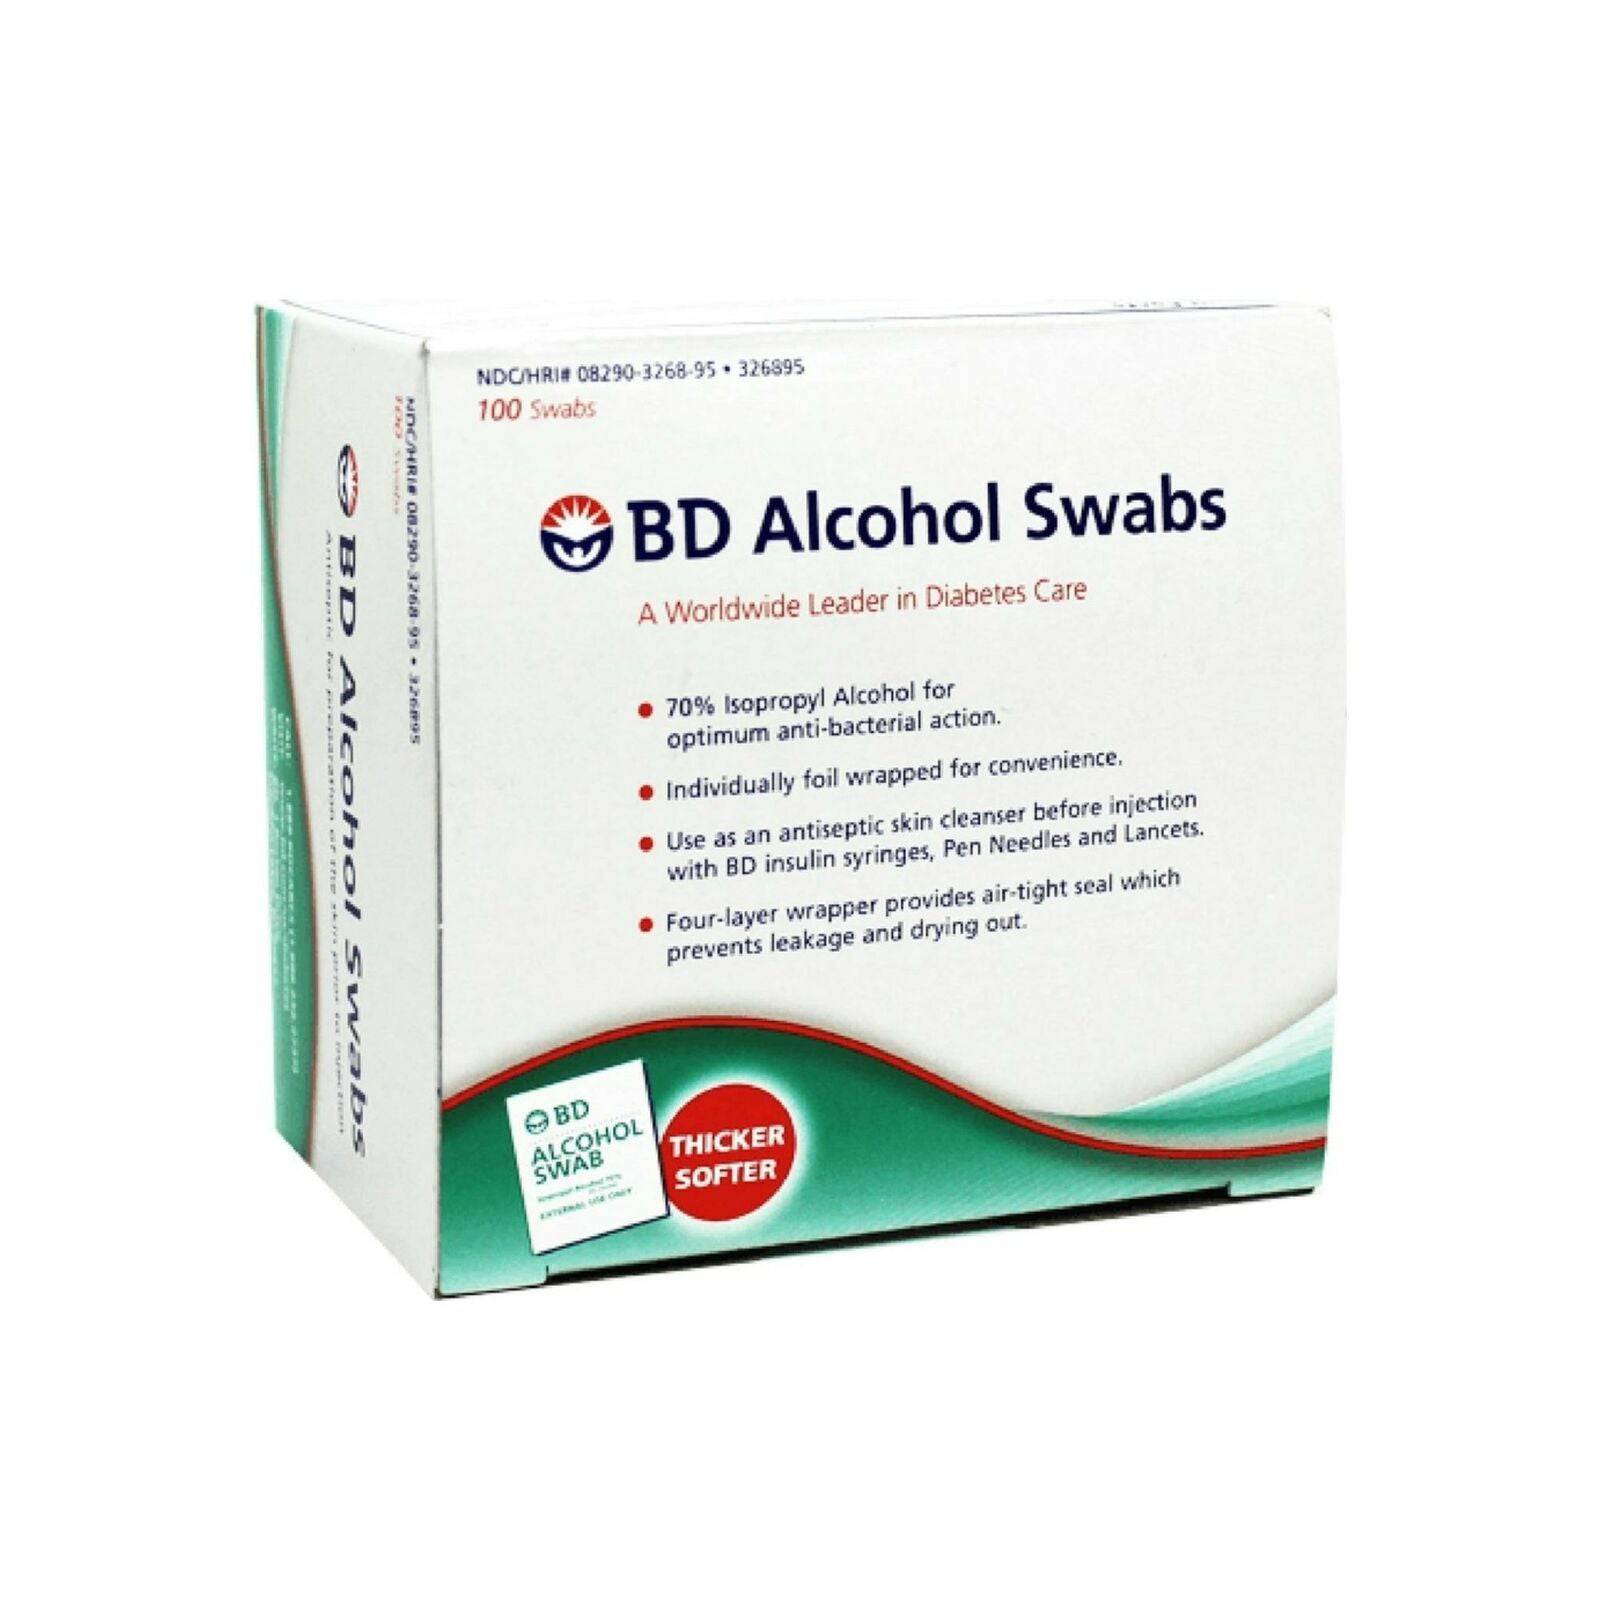 BECTON DICKINSON SWABS ALCOHOL 326895